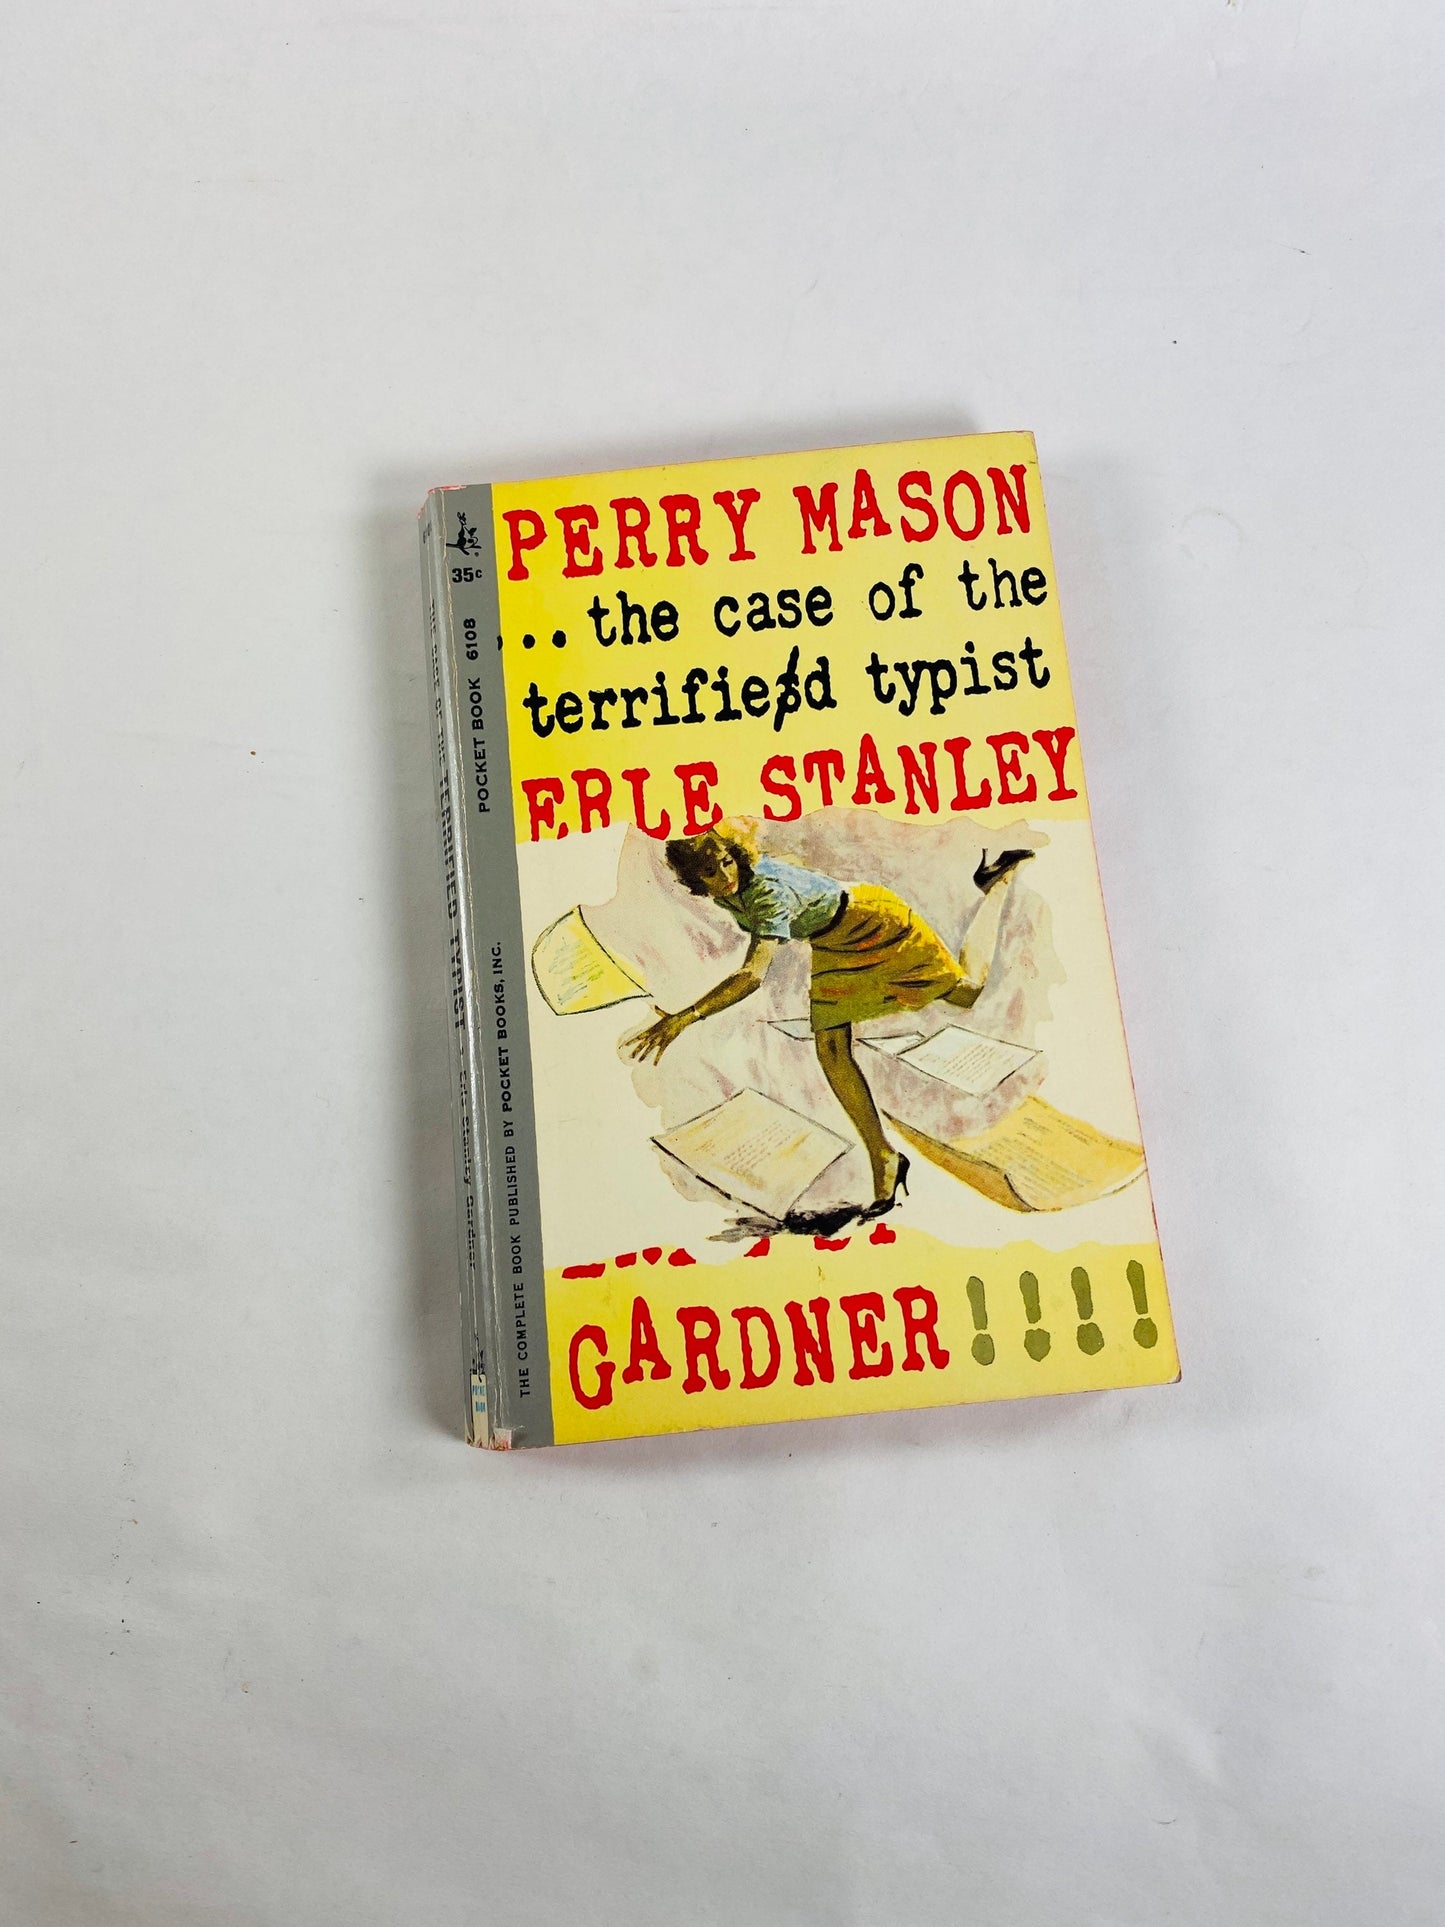 1956 Perry Mason the case of the terrified typist vintage paperback book by Erle Stanley Gardner FIRST PRINTING